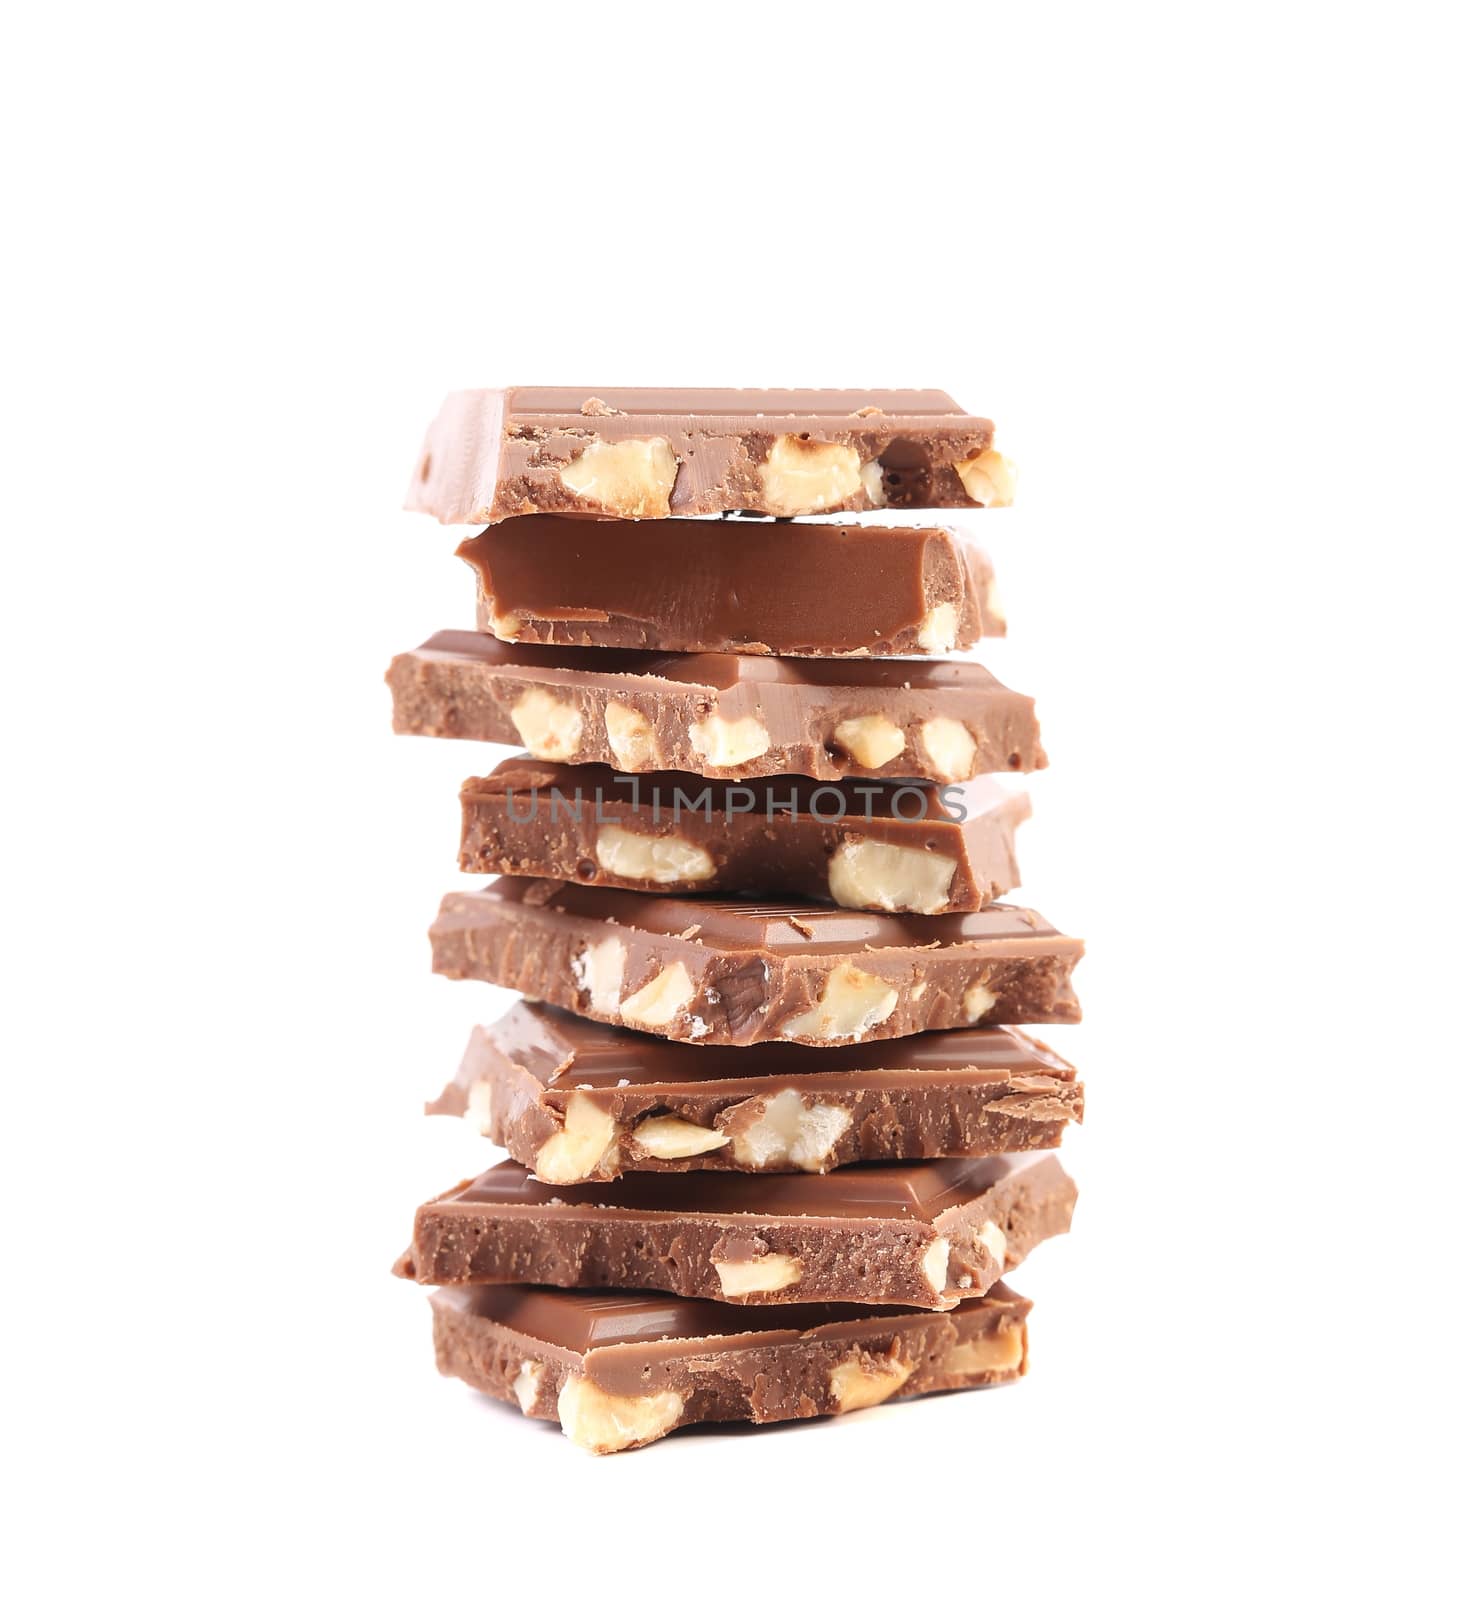 Stack of chocolate bars. Isolated on a white background.